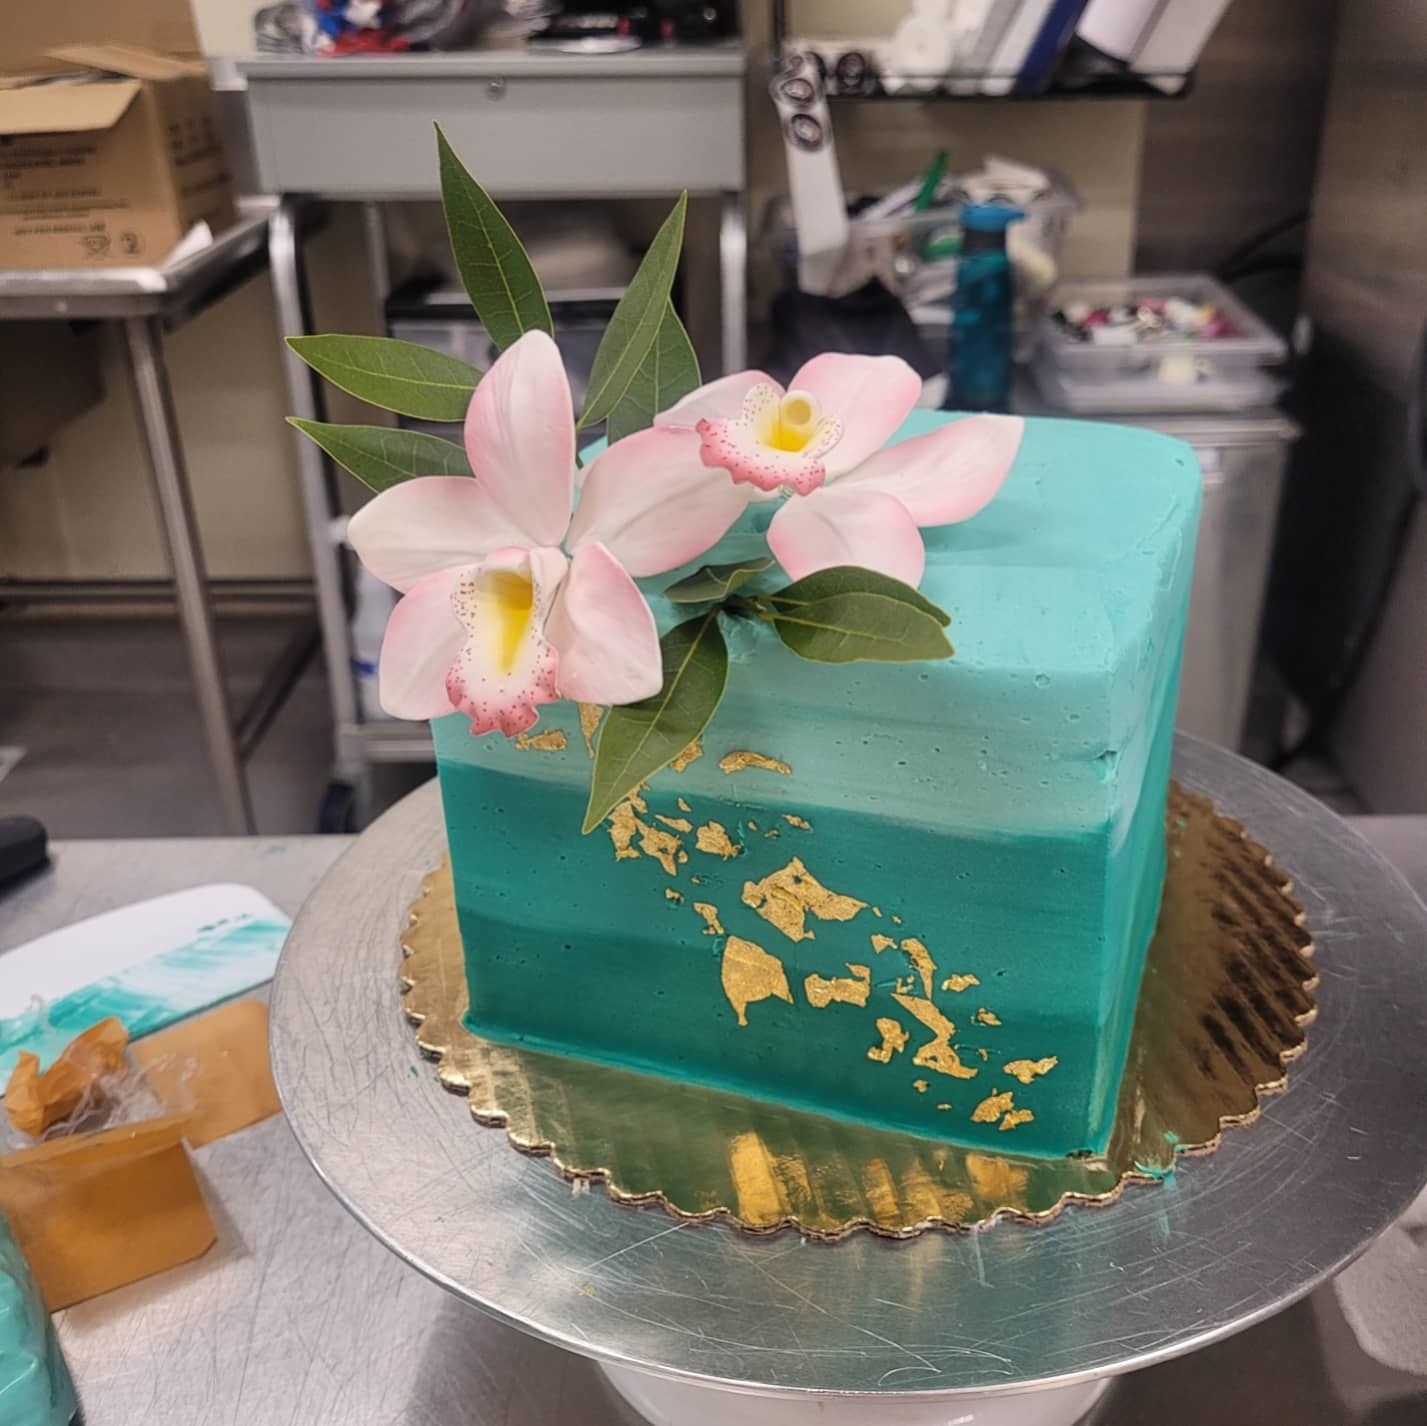 Reviewer image of an ombre cake decorated with gold leaf and flowers